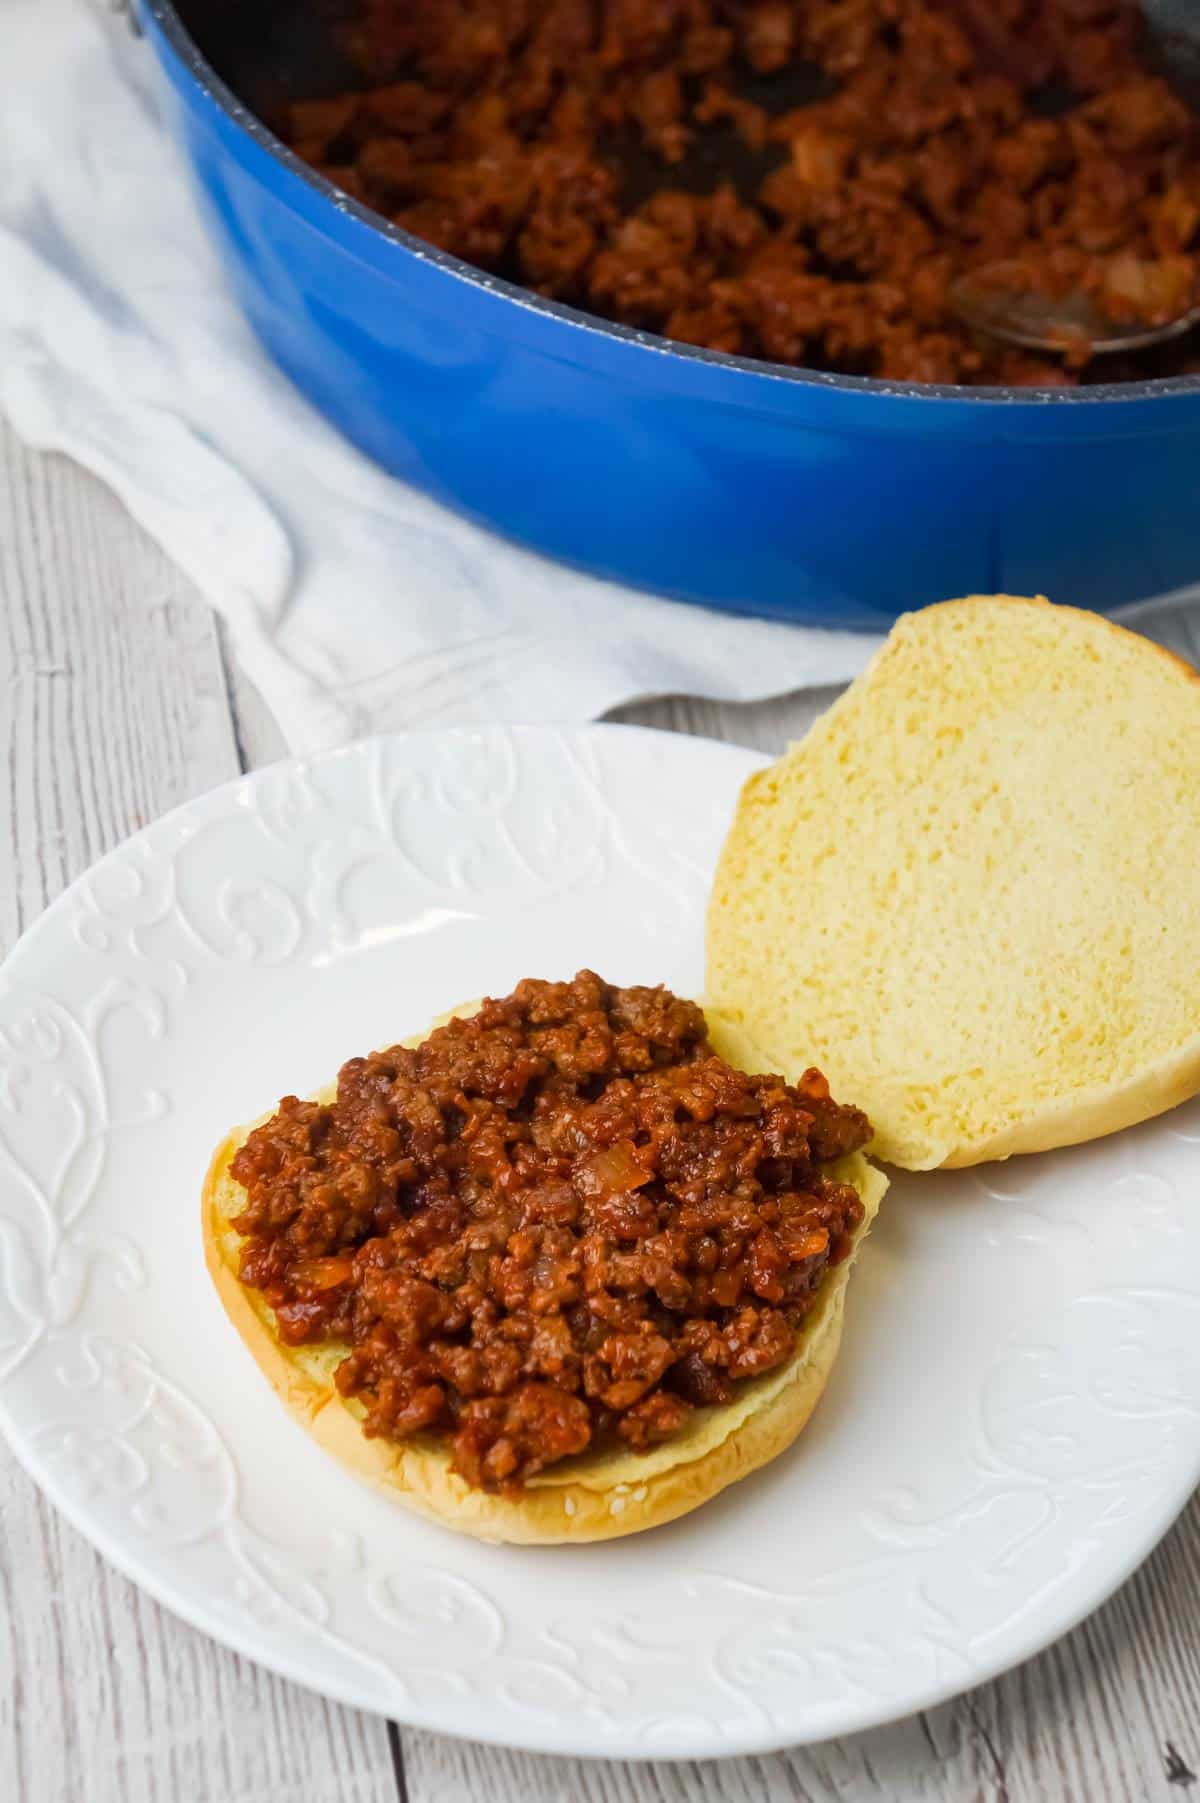 Mac and Cheese Sloppy Joes are hearty ground beef sandwiches topped with macaroni and cheese.